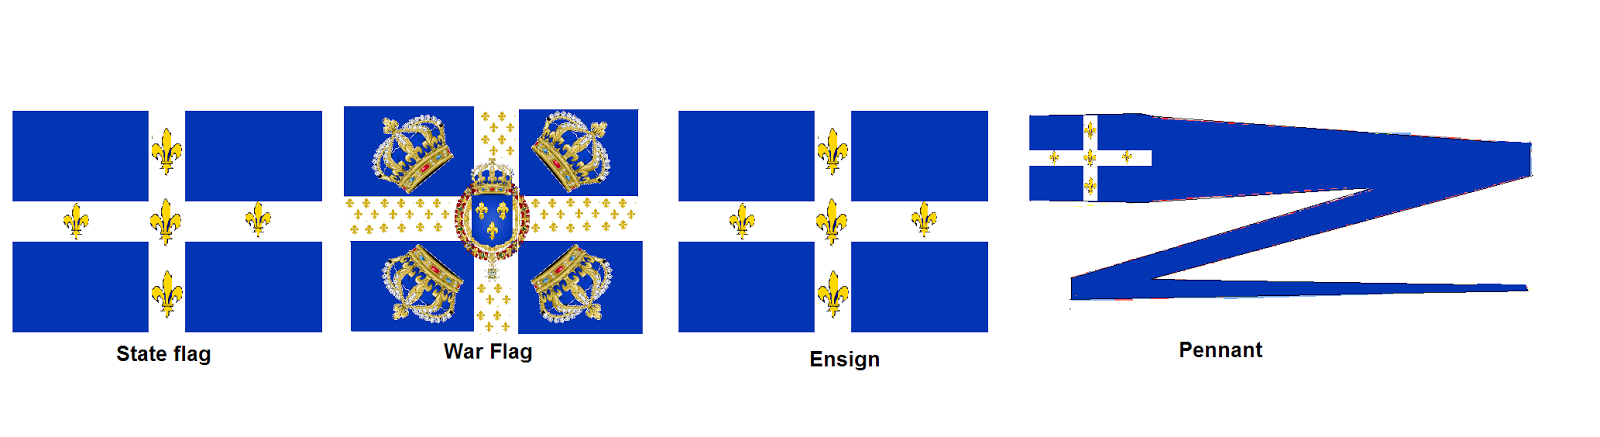 Empire Total War (game flags) | Flag With Meaning